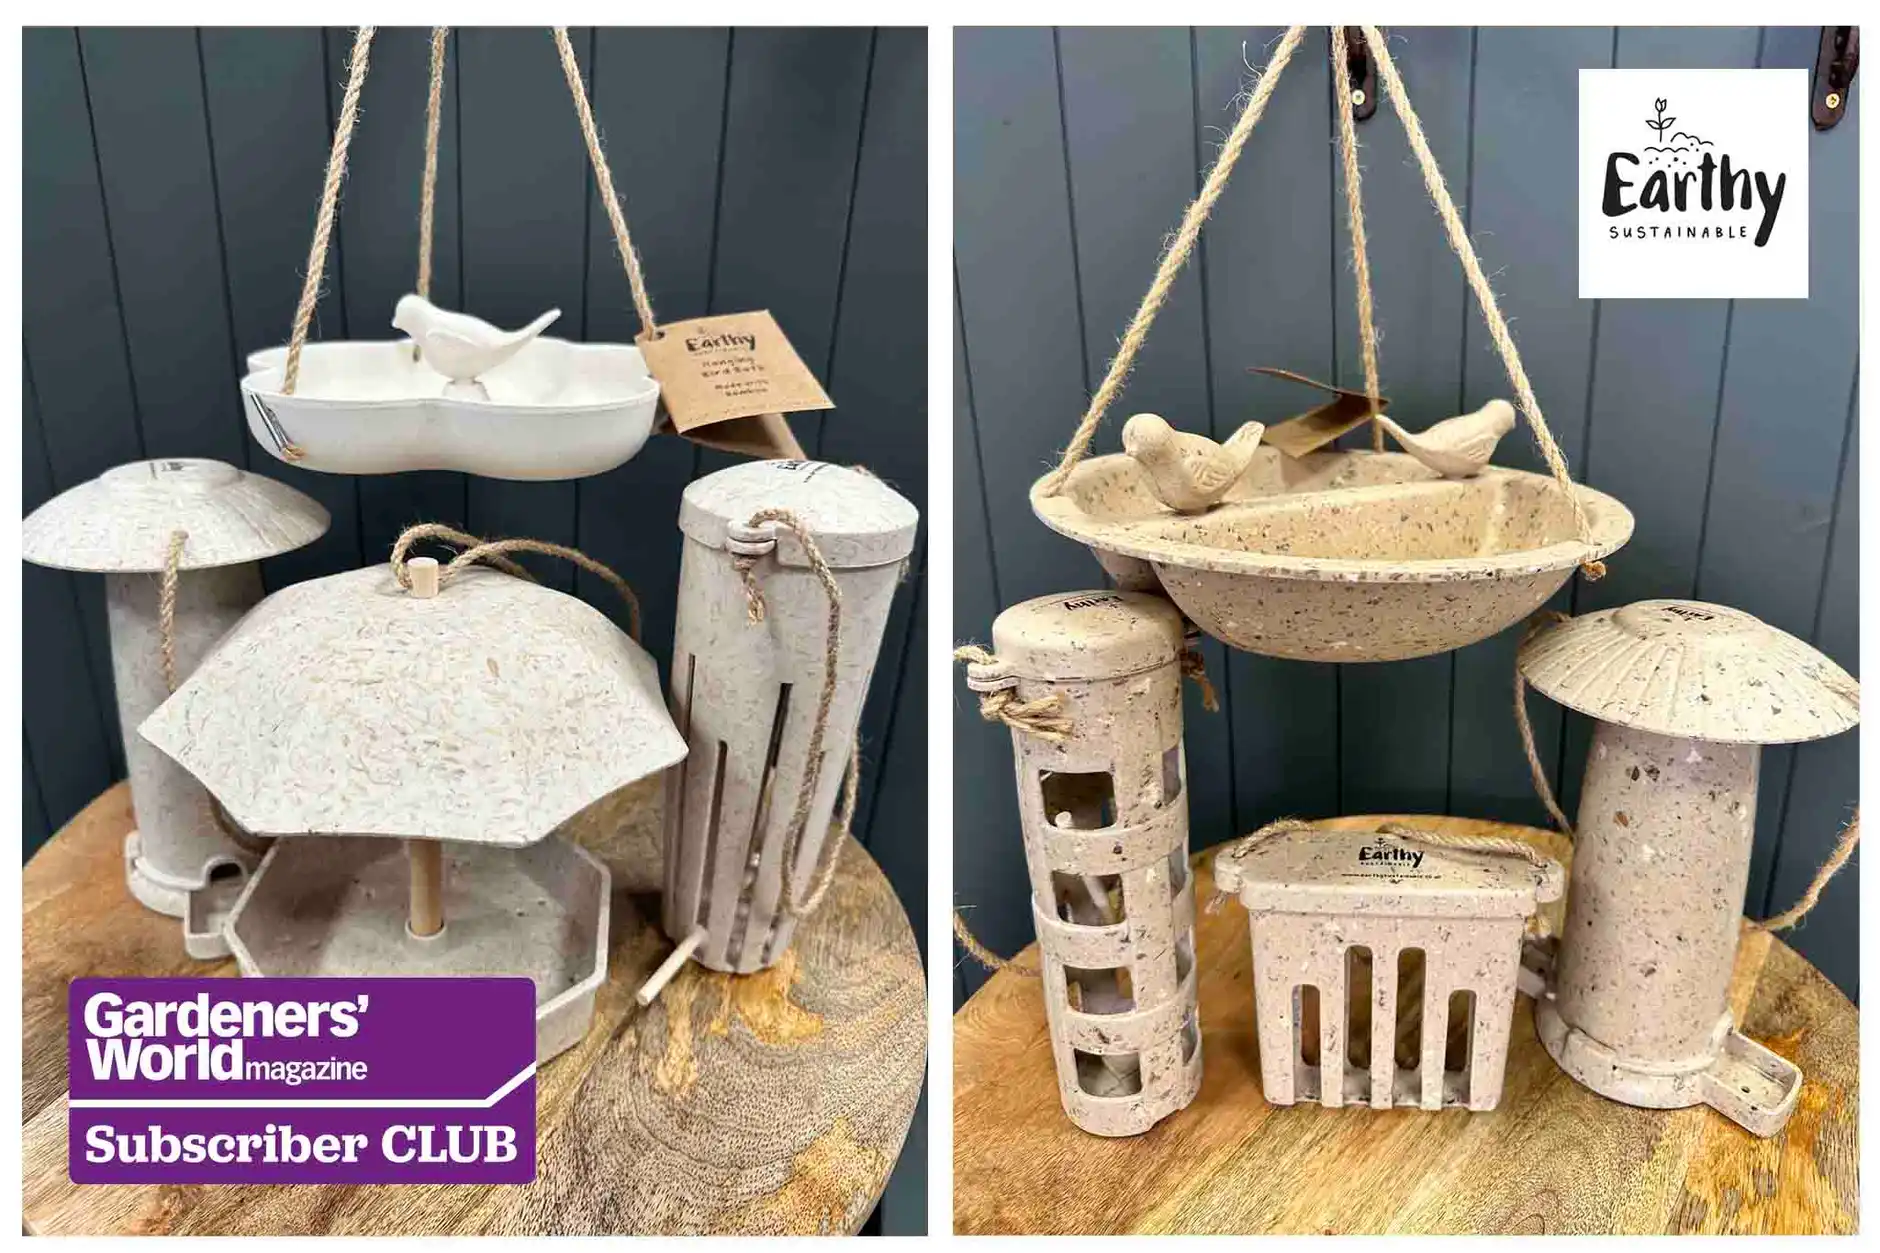 Image of Win a set of recycled bird feeders from Earthy Sustainable
